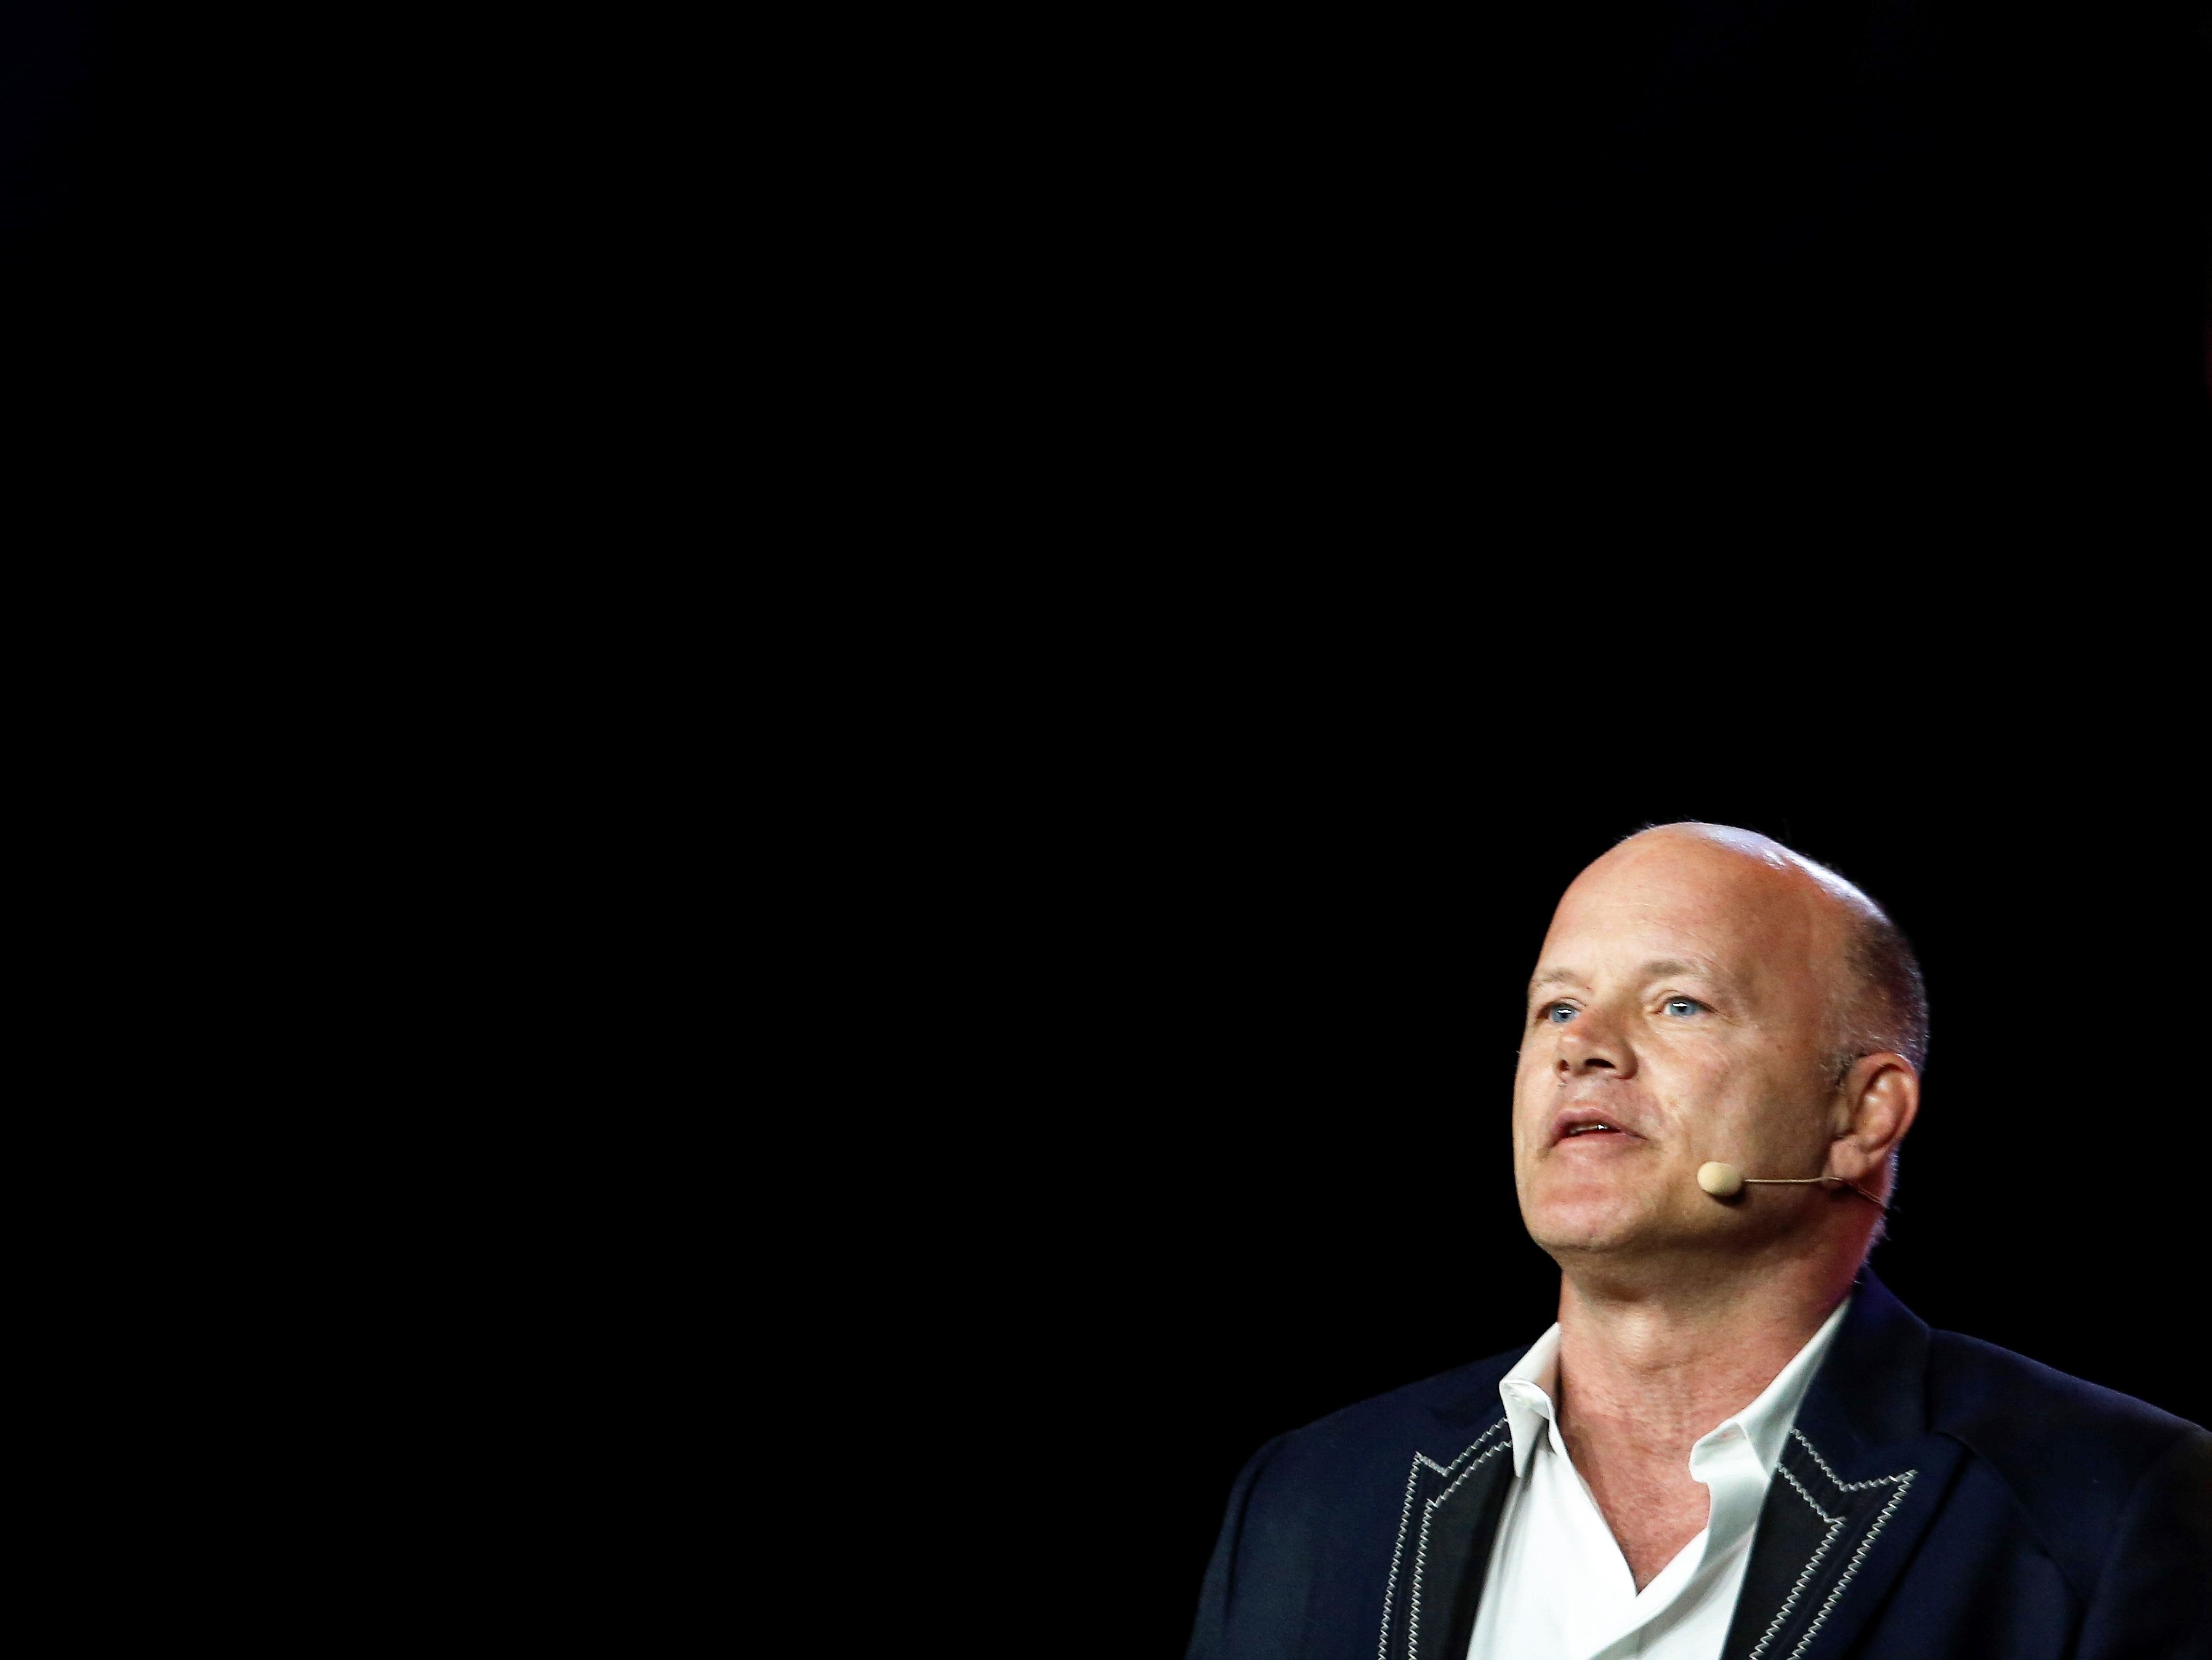 Galaxy Digital CEO Mike Novogratz speaks during the Bitcoin 2022 Conference on 8 April, 2022 in Miami, Florida